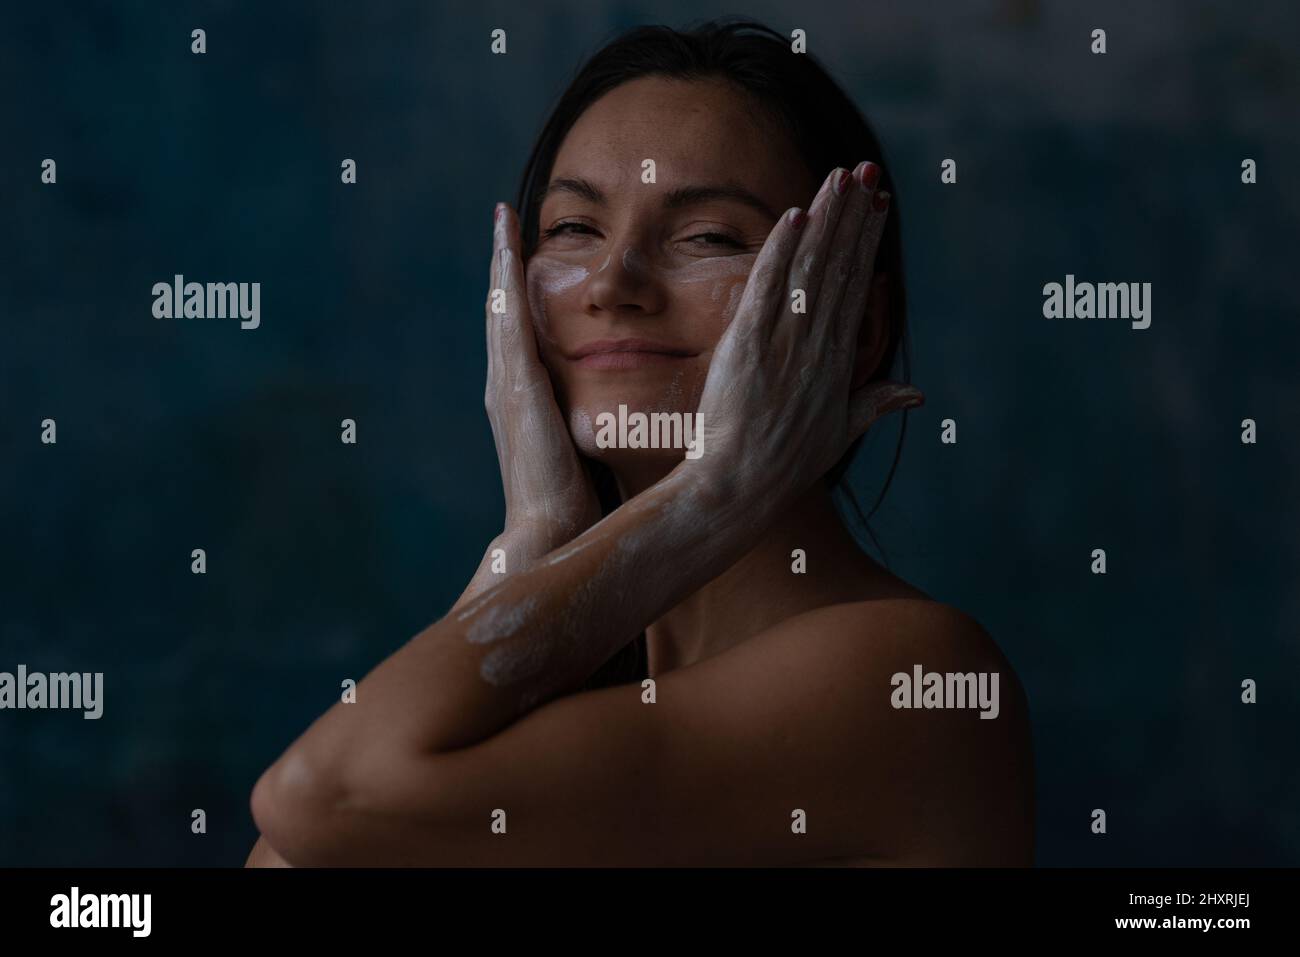 Woman drawing face by argil touching by hands and smiling Stock Photo